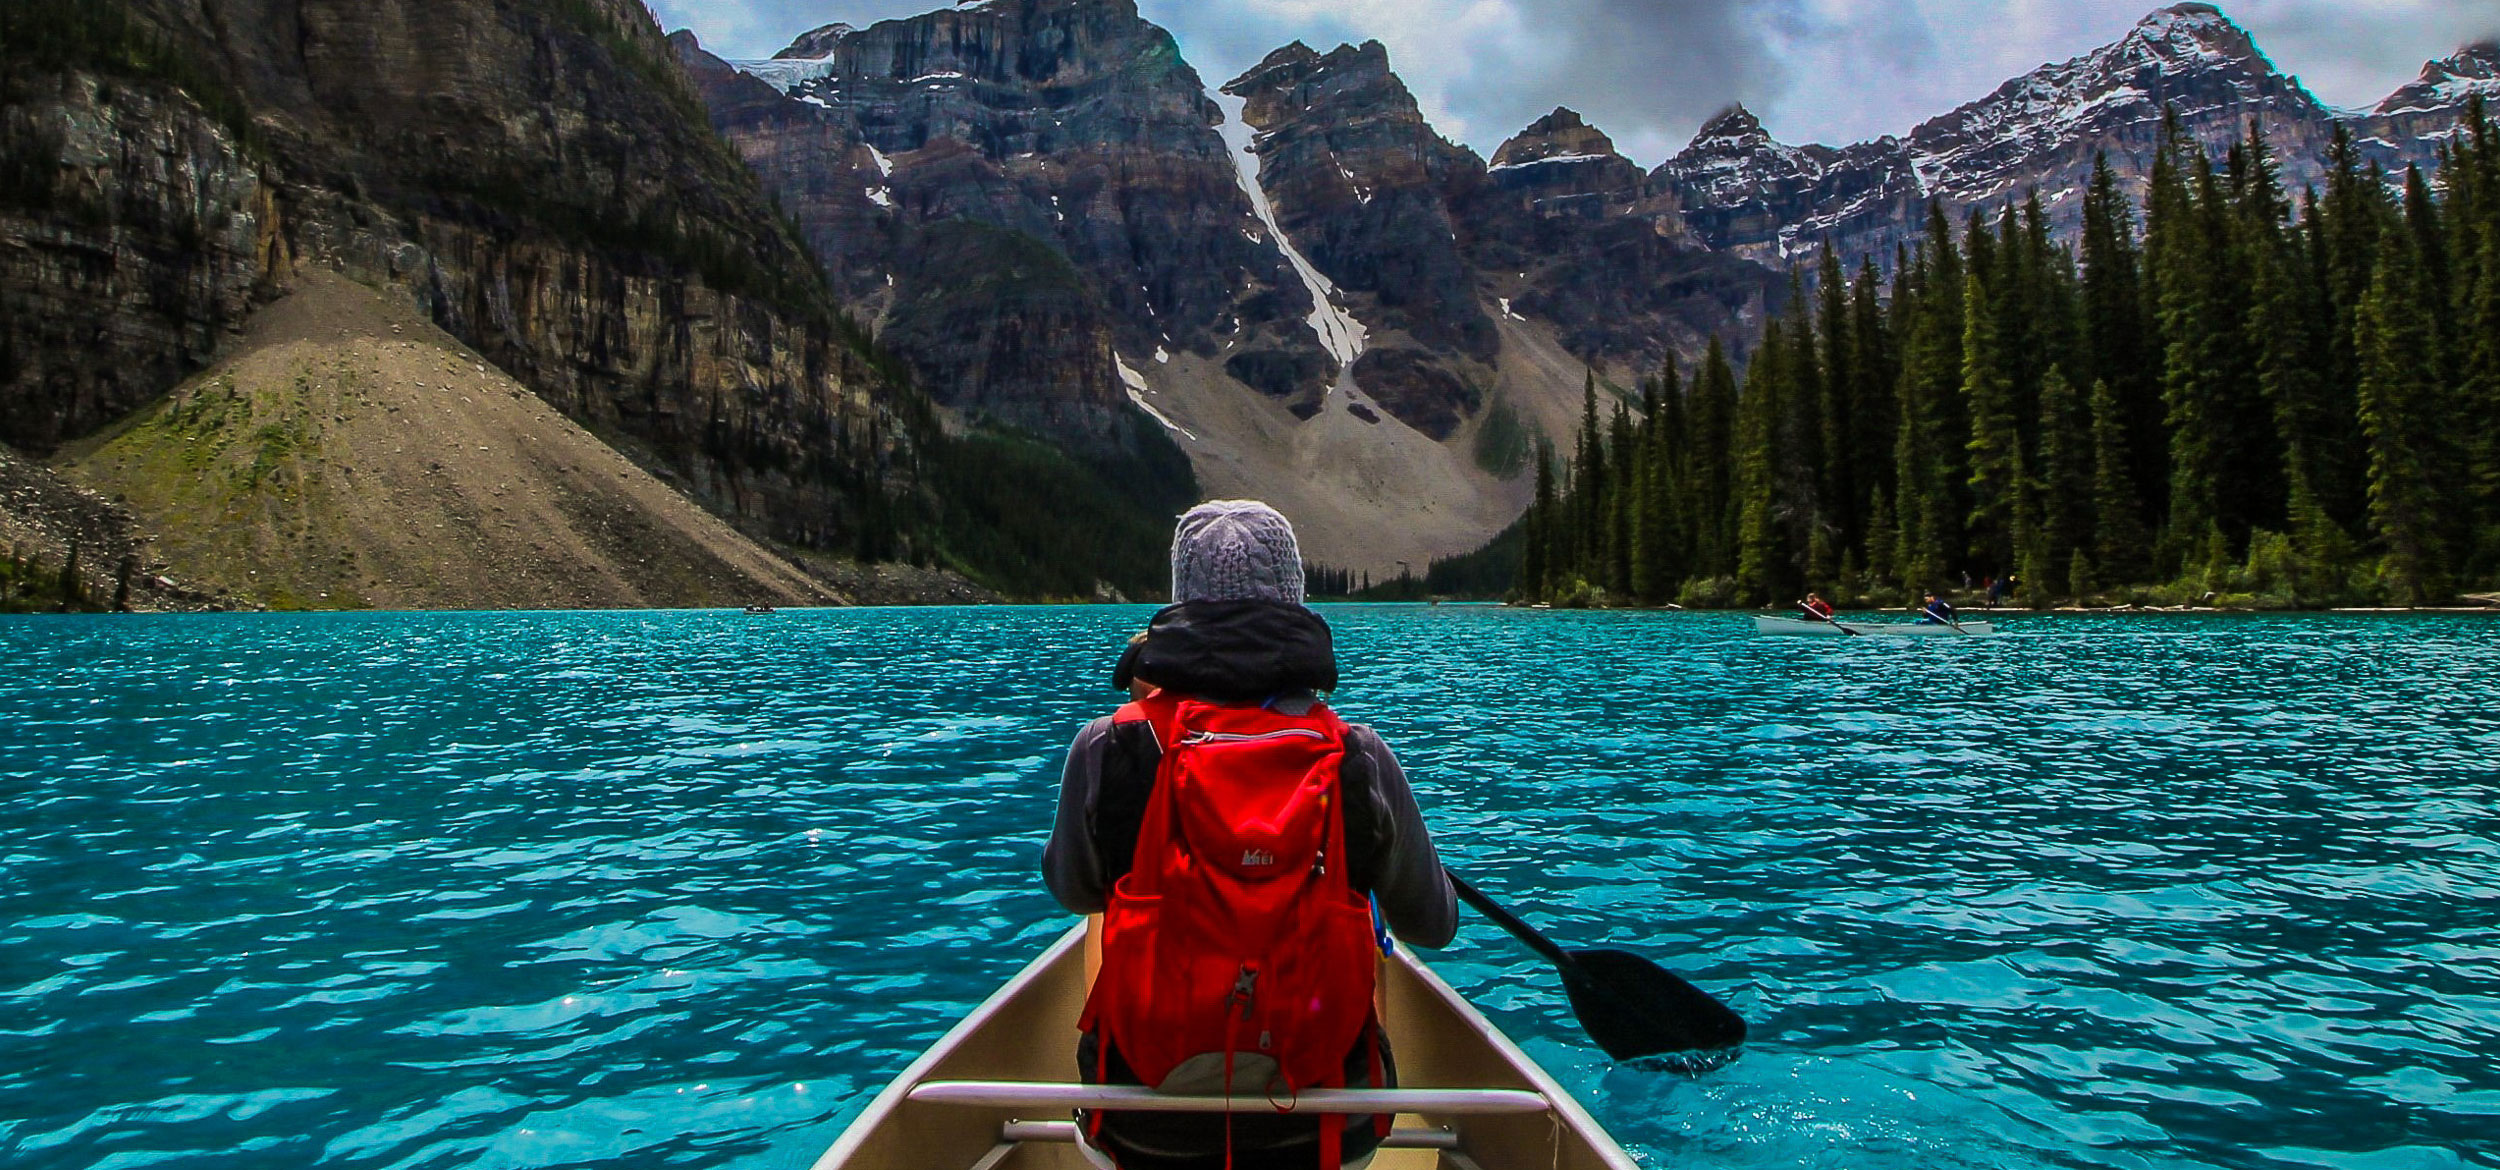 Woman canoeing on the turquoise water of Moraine Lake in Banff National Park, Canada